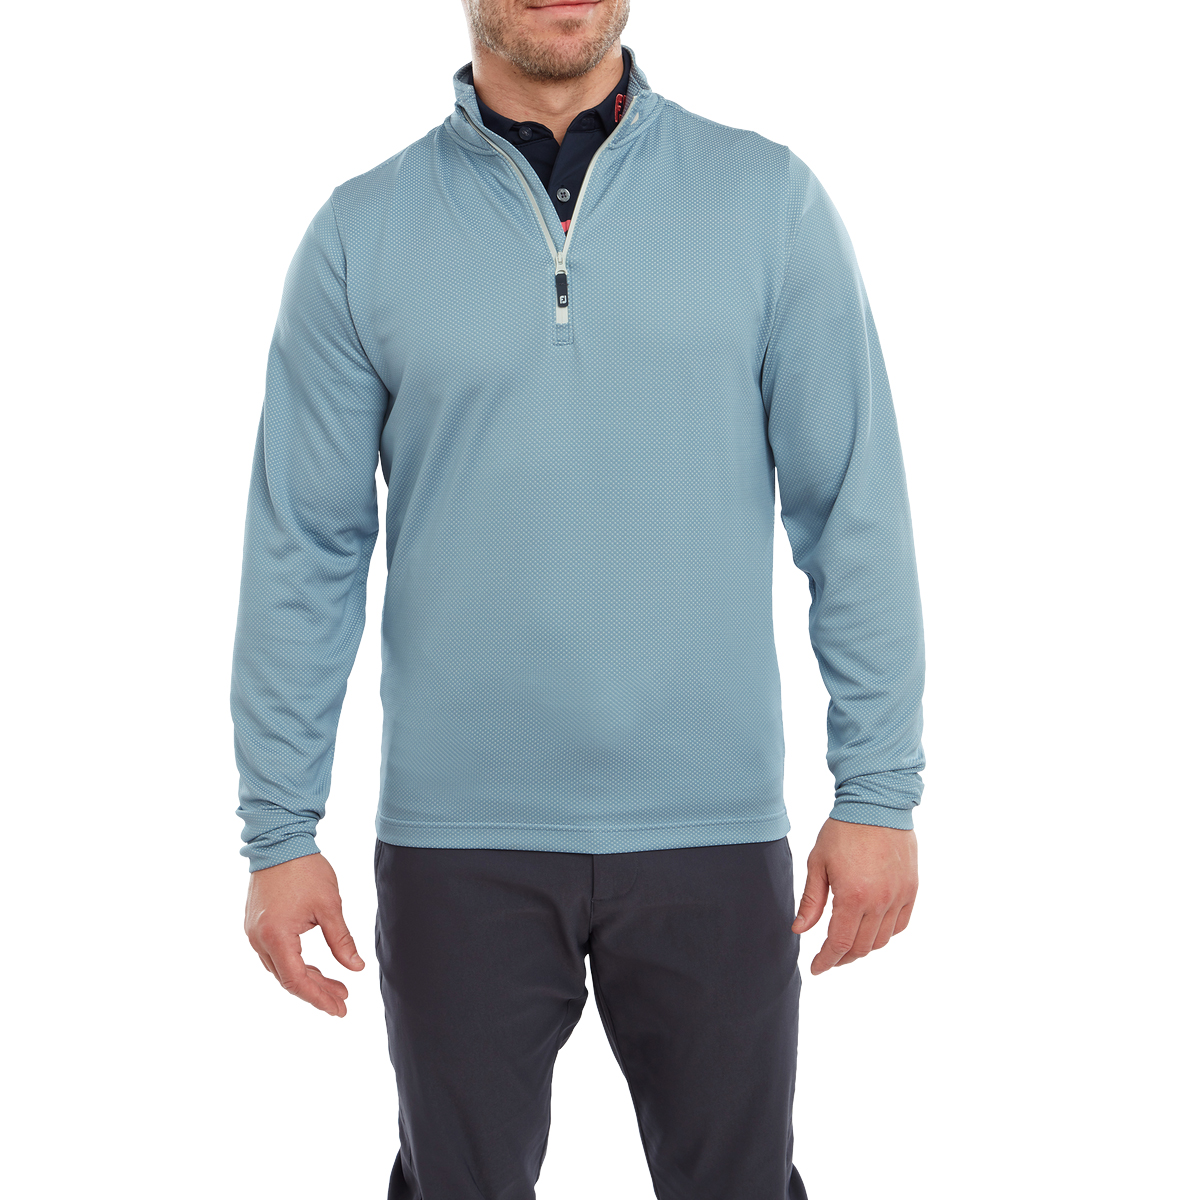 FootJoy Mens ThermoSeries Golf Mid-Layer Pullover 